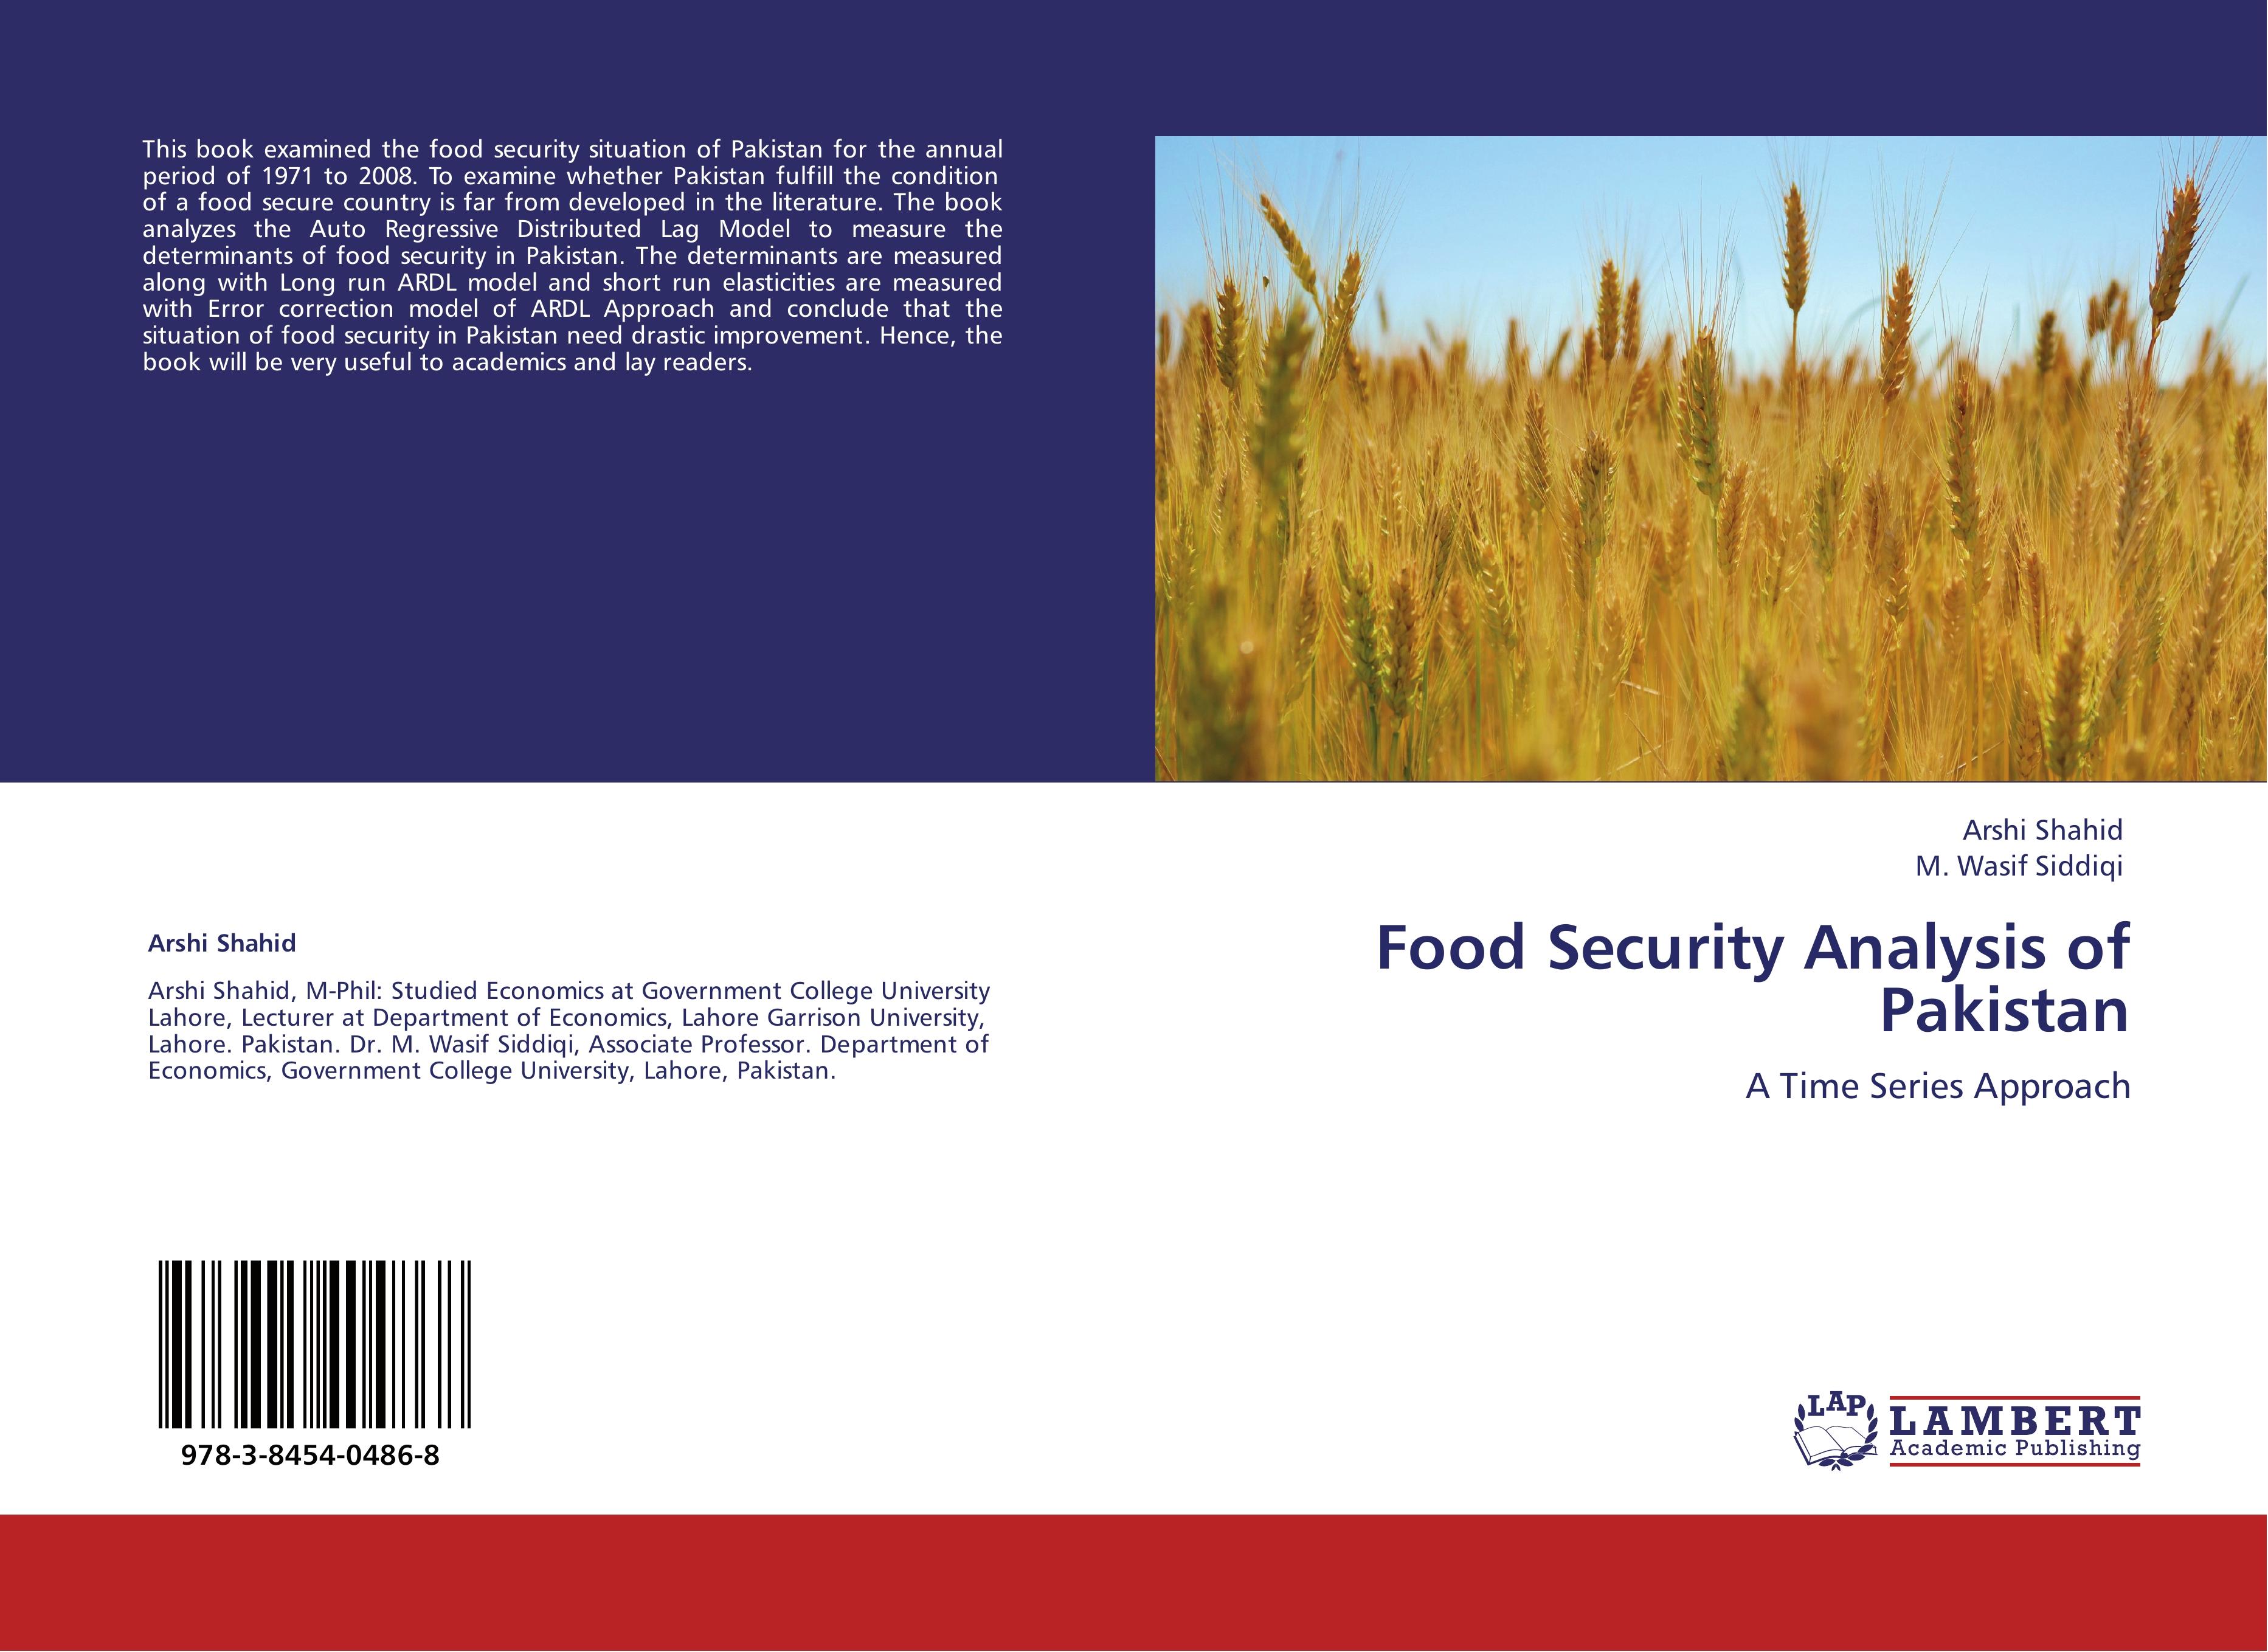 Food Security Analysis of Pakistan / A Time Series Approach / Arshi Shahid (u. a.) / Taschenbuch / Paperback / 96 S. / Englisch / 2011 / LAP LAMBERT Academic Publishing / EAN 9783845404868 - Shahid, Arshi